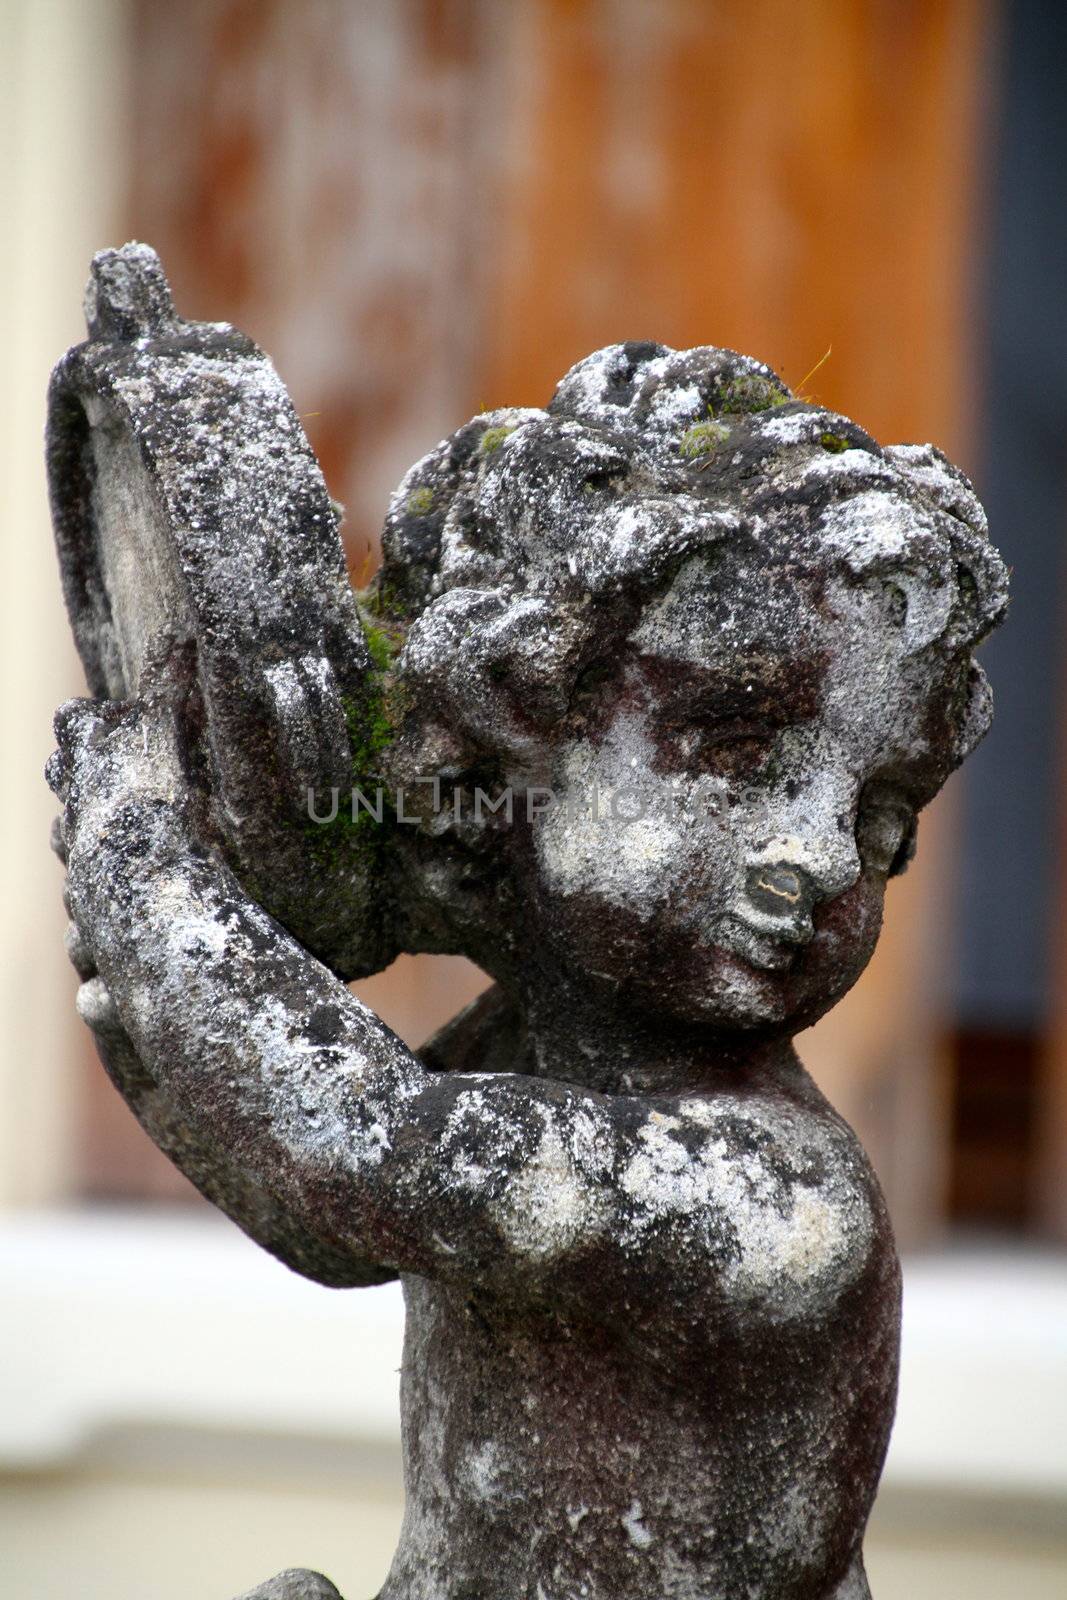 little angel playing the tambourine - old statue